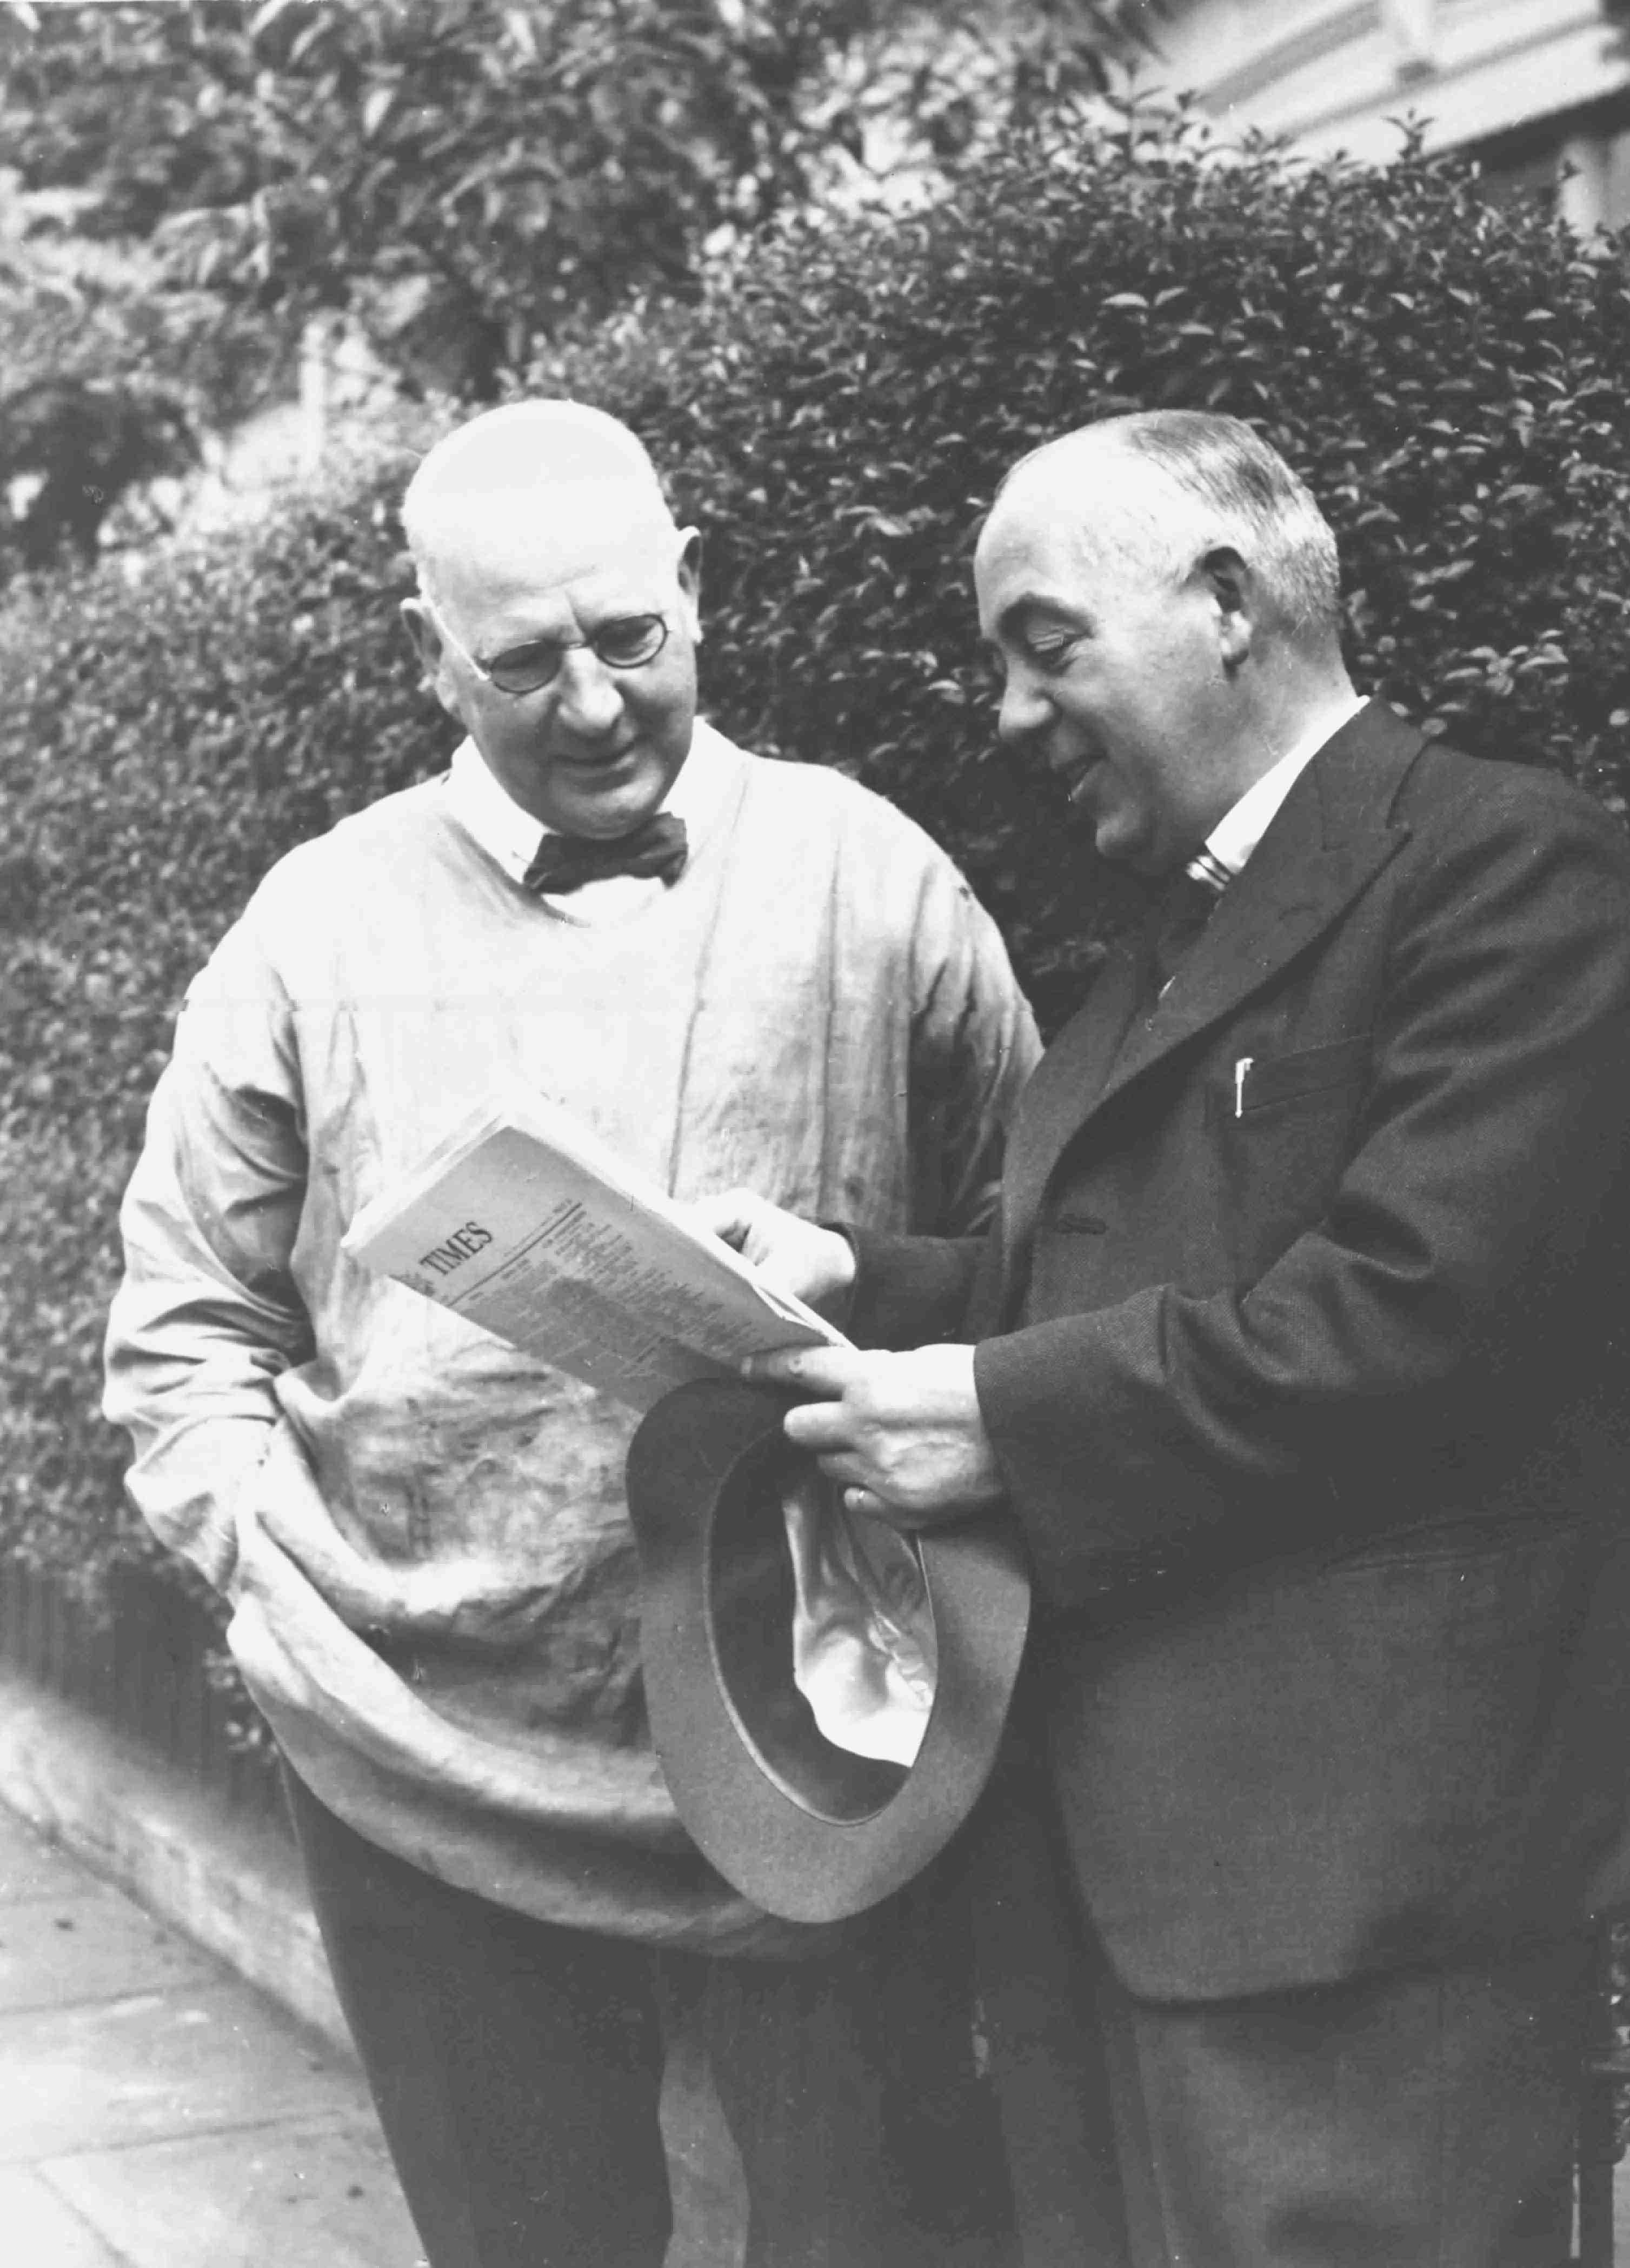 Photograph of John St Helier Lander with Blampied in 1937